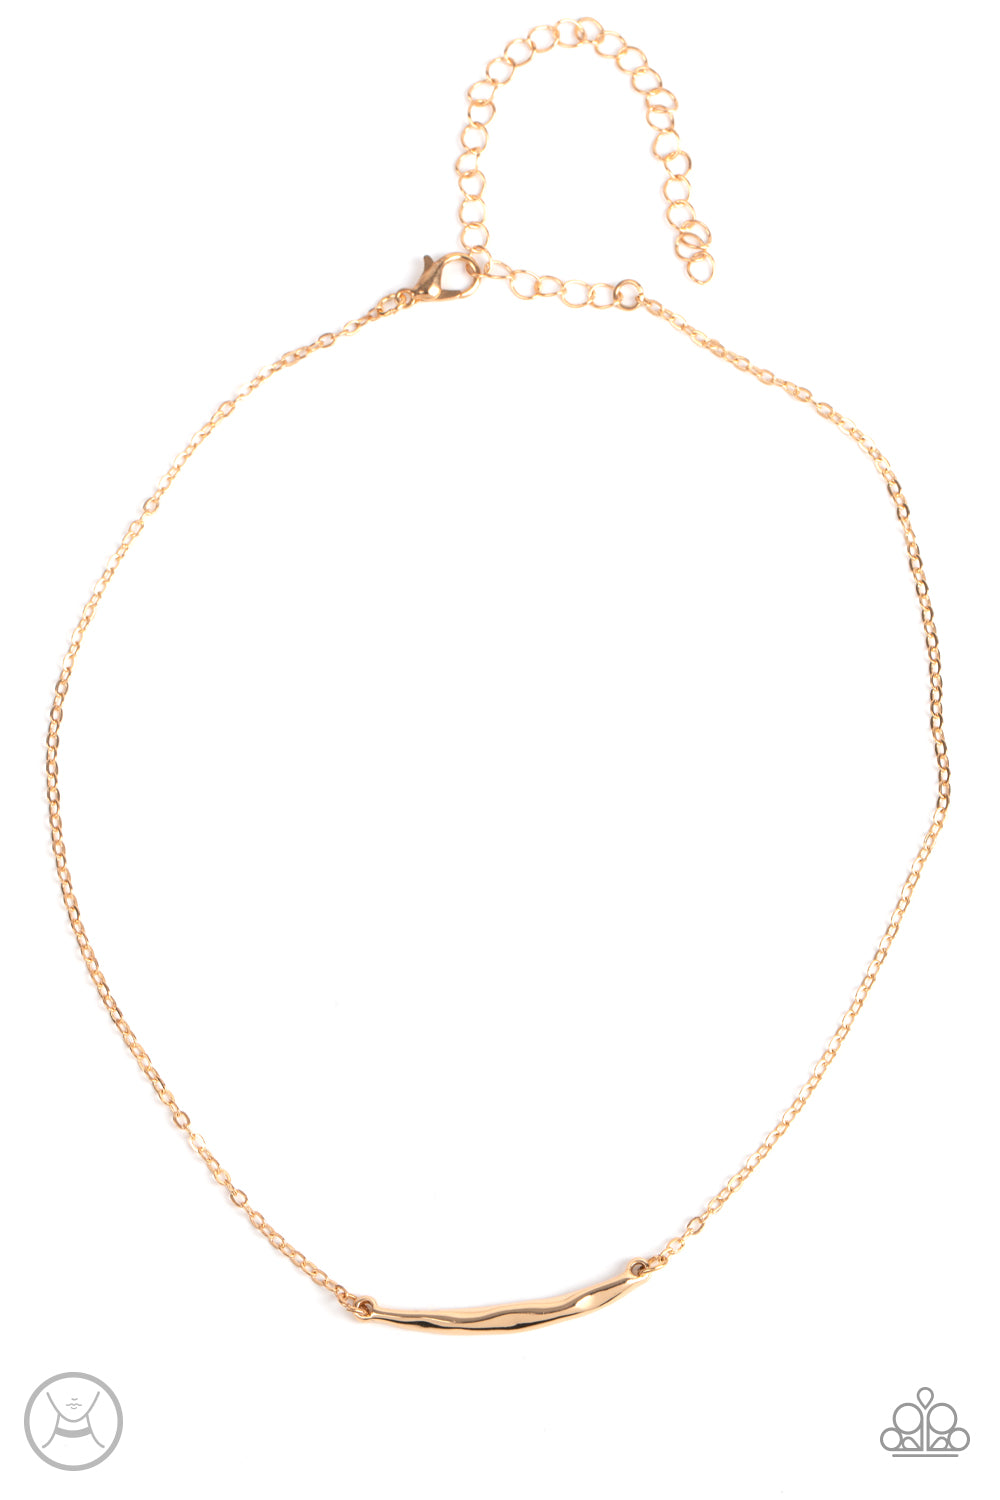 Taking It Easy Gold Necklace - Paparazzi Accessories  A hammered gold crescent attaches to a dainty gold chain around the neck for a trendy minimalist inspired look. Features an adjustable clasp closure.  Sold as one individual necklace. Includes one pair of matching earrings.